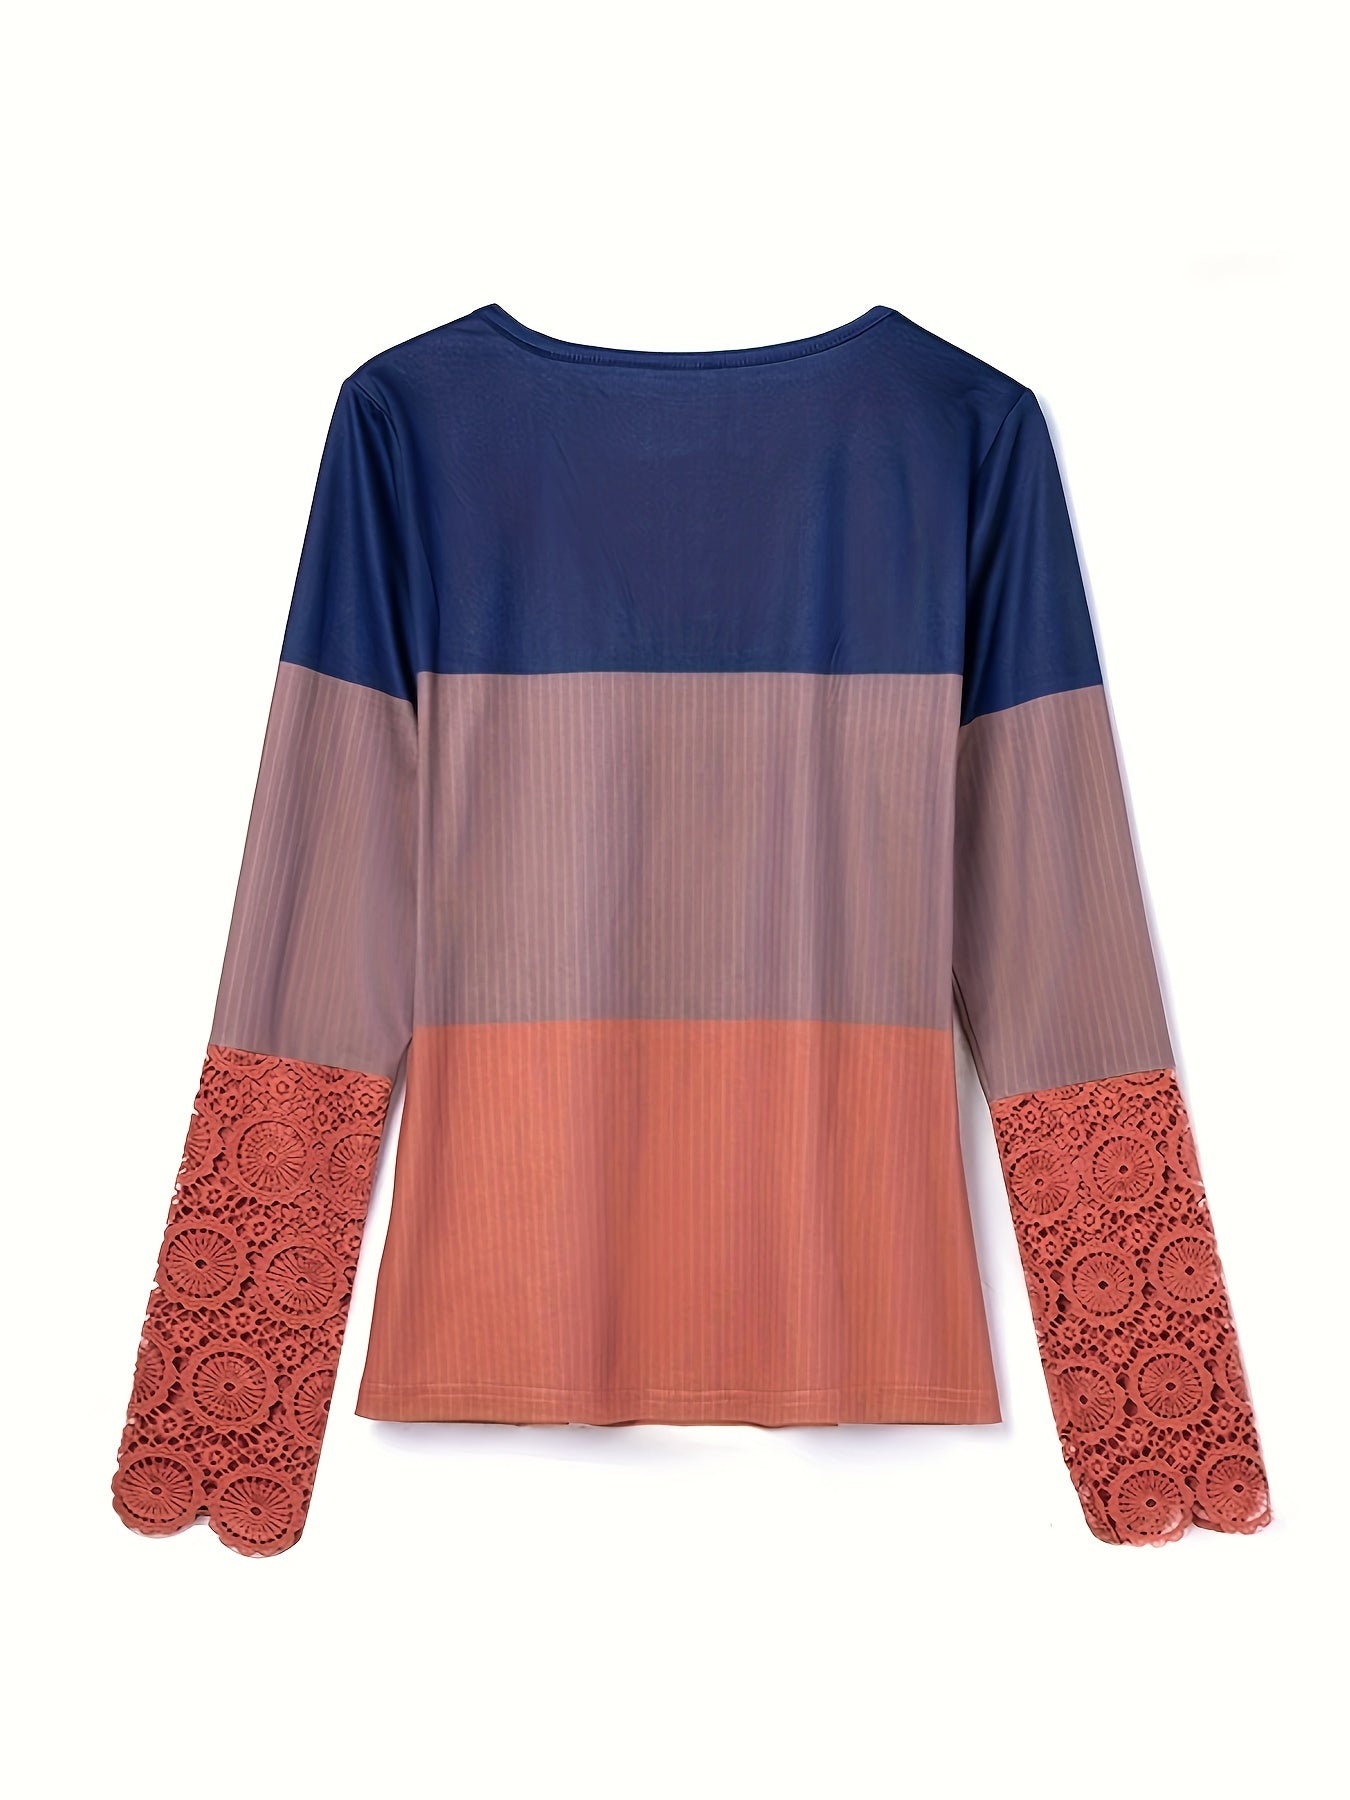 Lace Stitching Colorblock Cross Front T-Shirt, Casual Long Sleeve Top For Spring & Fall, Women's Clothing